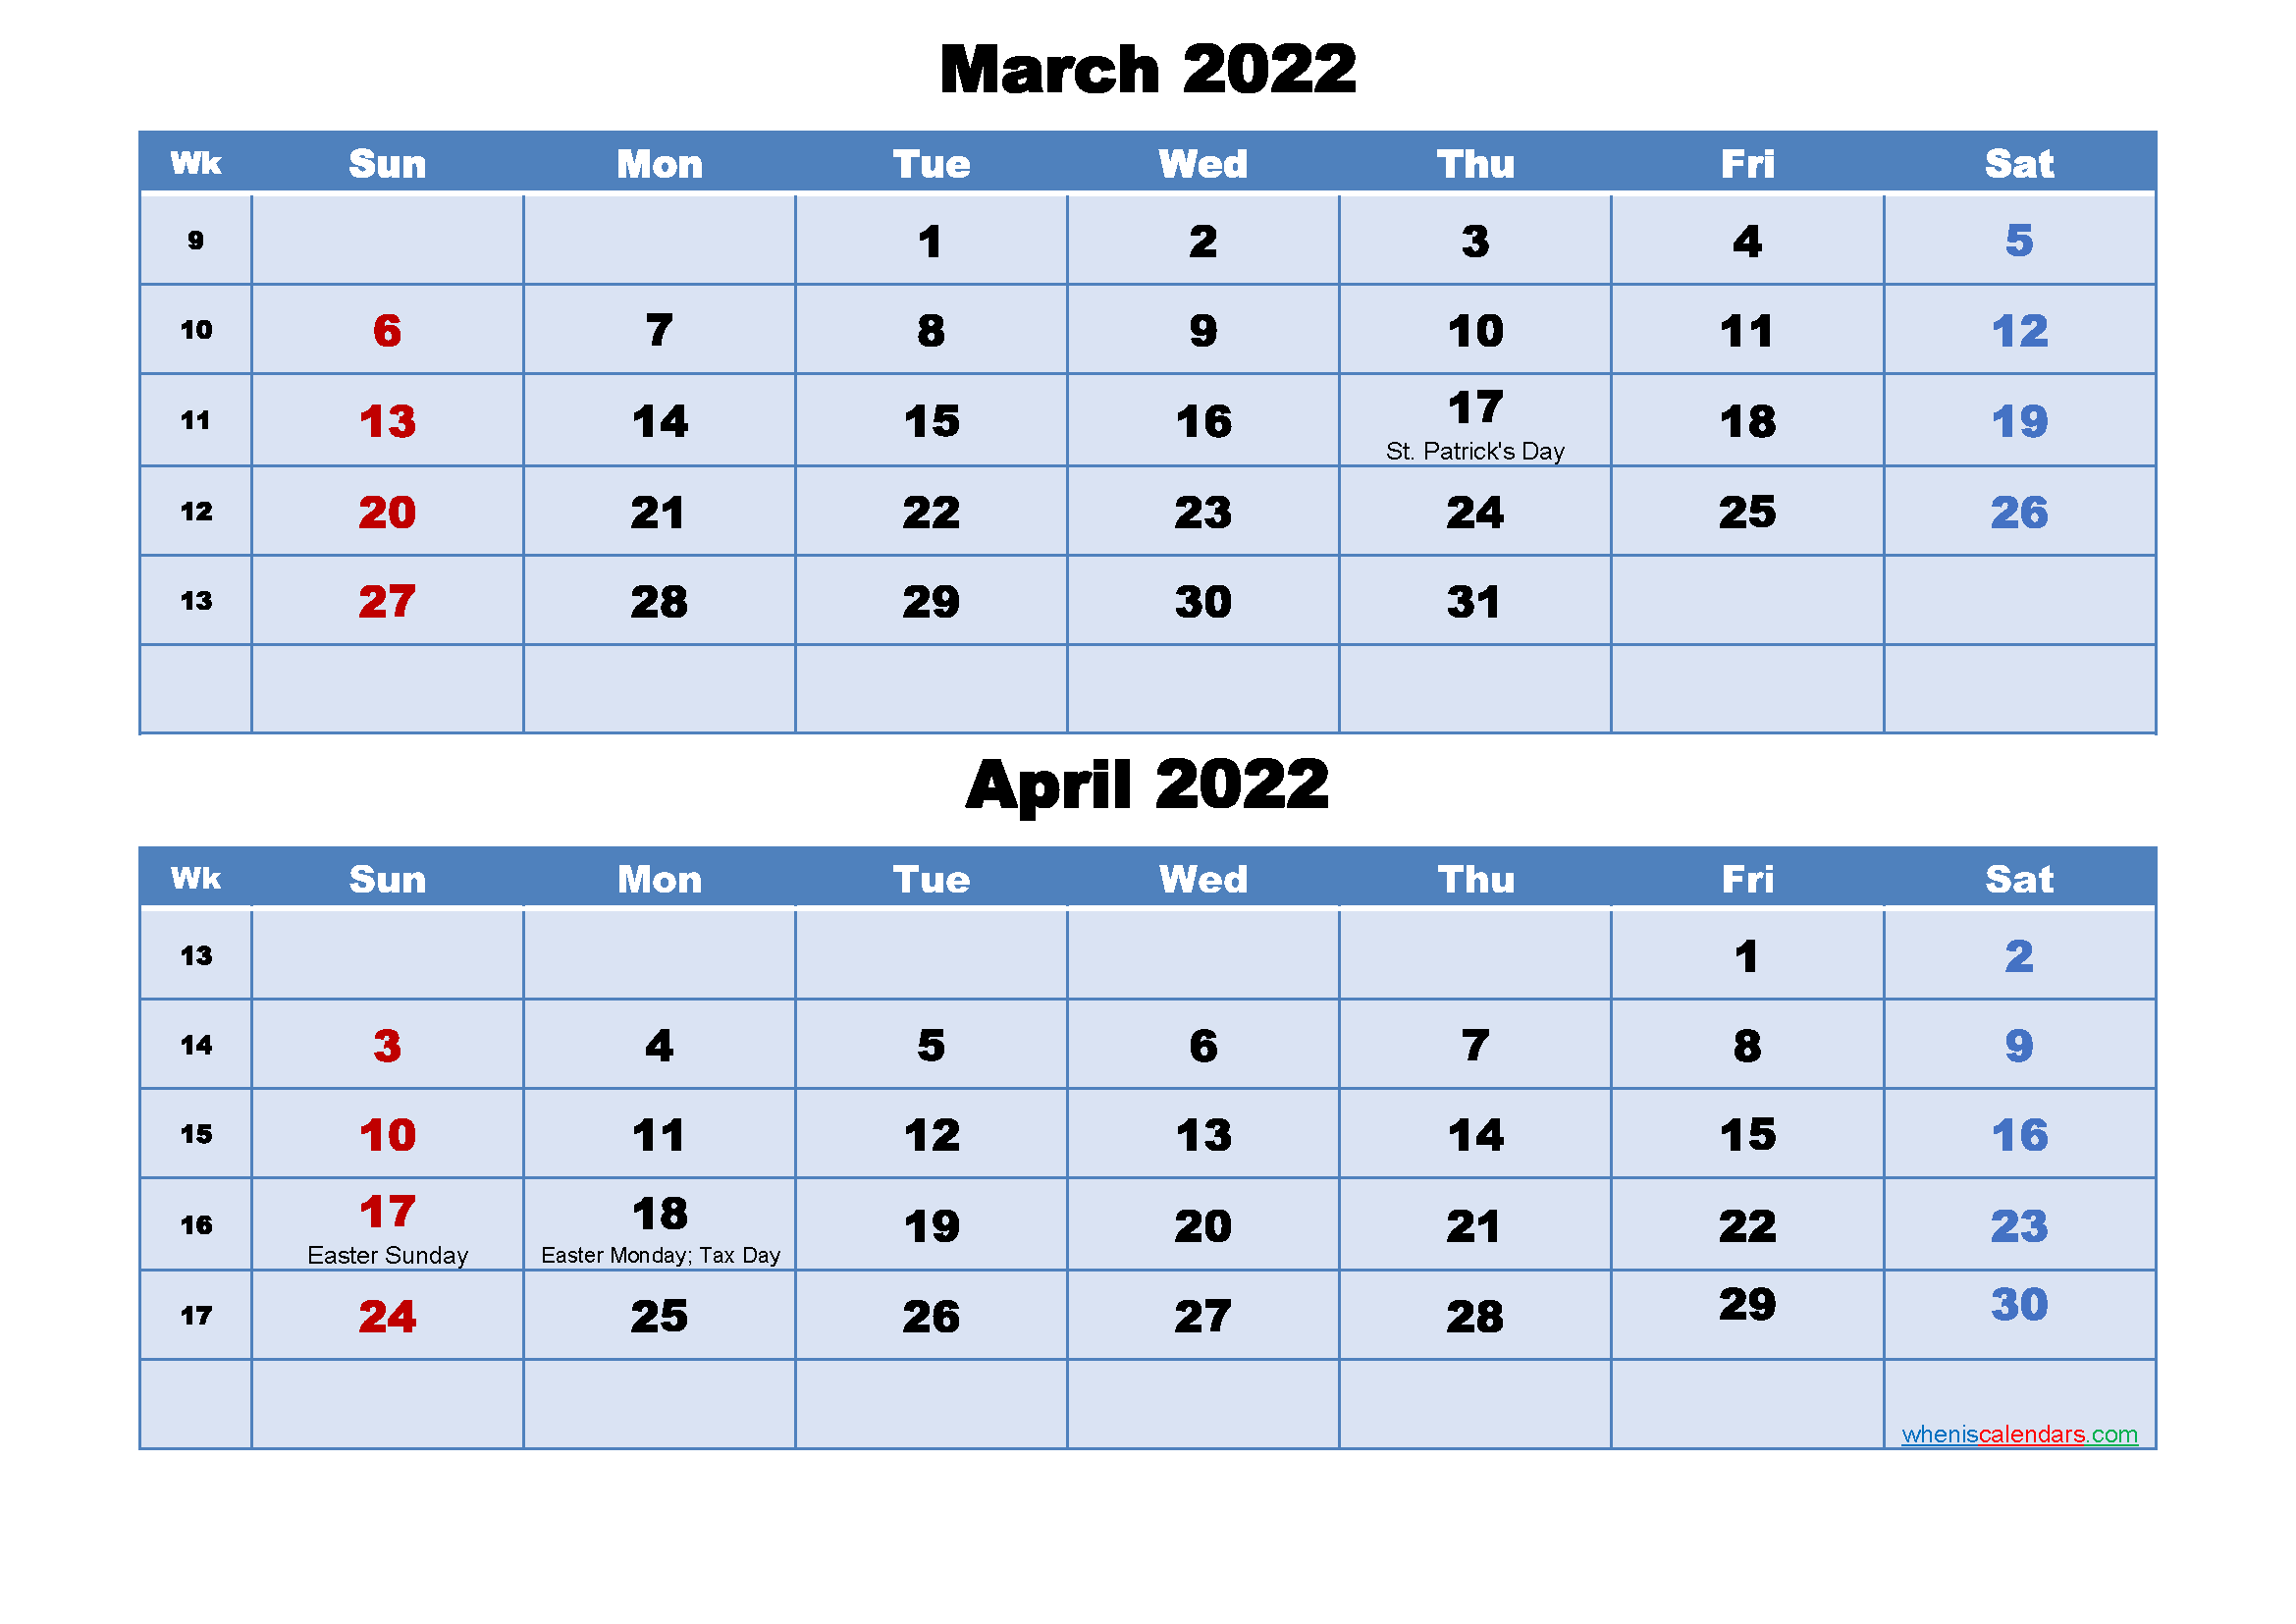 March April Calendar 2022 March And April 2022 Calendar With Holidays